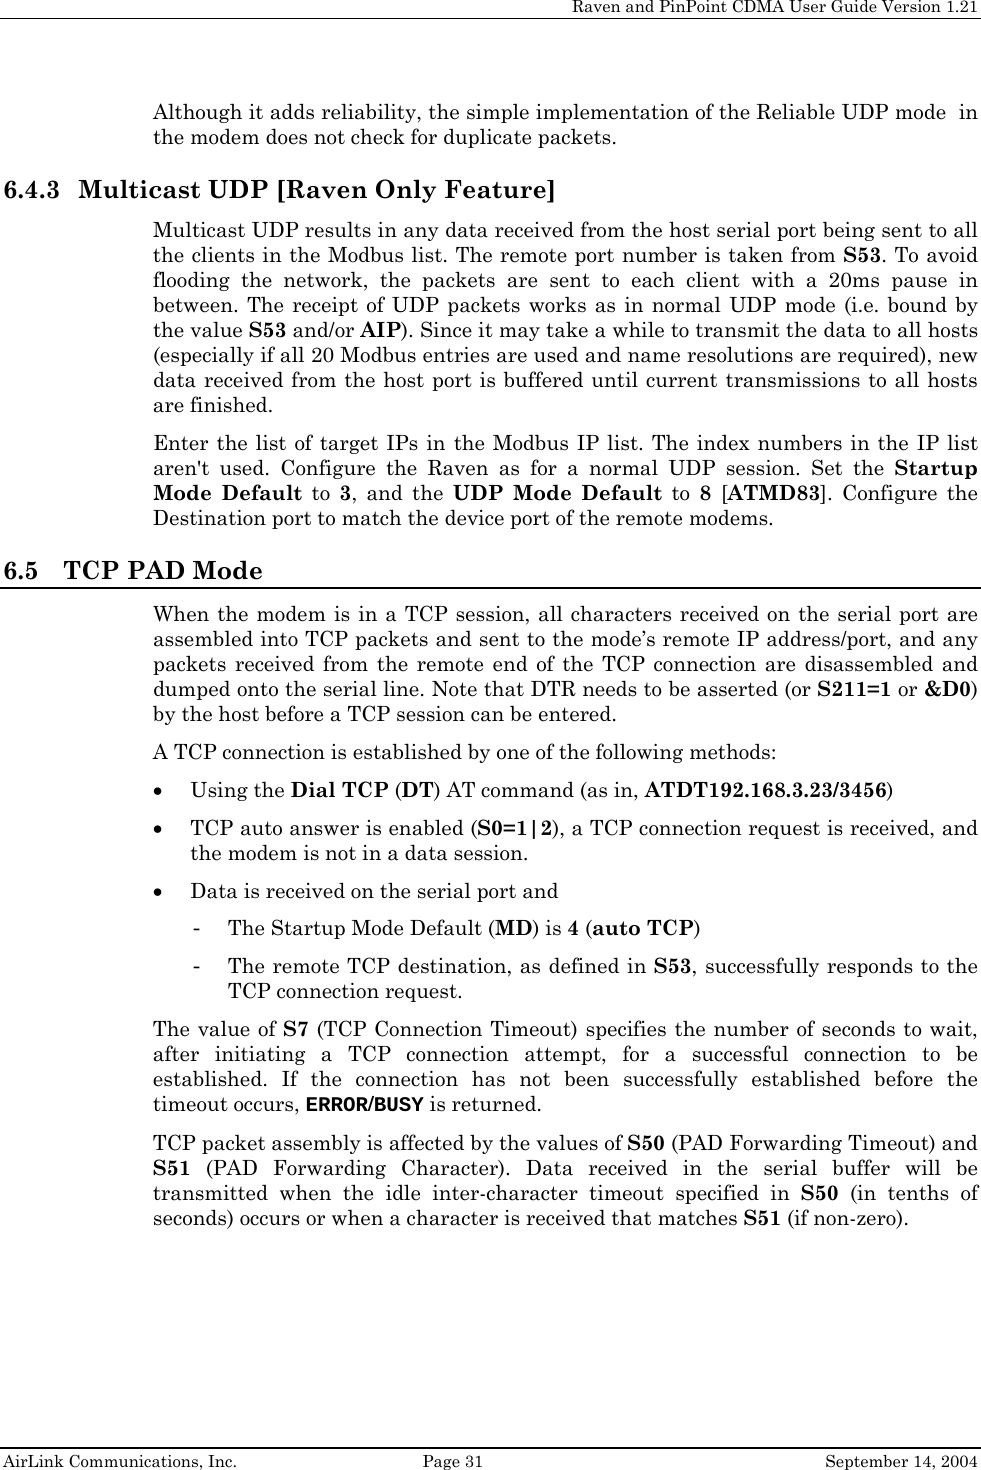     Raven and PinPoint CDMA User Guide Version 1.21  AirLink Communications, Inc.  Page 31  September 14, 2004 Although it adds reliability, the simple implementation of the Reliable UDP mode  in the modem does not check for duplicate packets. 6.4.3 Multicast UDP [Raven Only Feature] Multicast UDP results in any data received from the host serial port being sent to all the clients in the Modbus list. The remote port number is taken from S53. To avoid flooding the network, the packets are sent to each client with a 20ms pause in between. The receipt of UDP packets works as in normal UDP mode (i.e. bound by the value S53 and/or AIP). Since it may take a while to transmit the data to all hosts (especially if all 20 Modbus entries are used and name resolutions are required), new data received from the host port is buffered until current transmissions to all hosts are finished. Enter the list of target IPs in the Modbus IP list. The index numbers in the IP list aren&apos;t used. Configure the Raven as for a normal UDP session. Set the Startup Mode Default to 3, and the UDP Mode Default to 8 [ATMD83]. Configure the Destination port to match the device port of the remote modems. 6.5 TCP PAD Mode When the modem is in a TCP session, all characters received on the serial port are assembled into TCP packets and sent to the mode’s remote IP address/port, and any packets received from the remote end of the TCP connection are disassembled and dumped onto the serial line. Note that DTR needs to be asserted (or S211=1 or &amp;D0) by the host before a TCP session can be entered. A TCP connection is established by one of the following methods: • Using the Dial TCP (DT) AT command (as in, ATDT192.168.3.23/3456) • TCP auto answer is enabled (S0=1|2), a TCP connection request is received, and the modem is not in a data session. • Data is received on the serial port and  - The Startup Mode Default (MD) is 4 (auto TCP) - The remote TCP destination, as defined in S53, successfully responds to the TCP connection request.  The value of S7 (TCP Connection Timeout) specifies the number of seconds to wait, after initiating a TCP connection attempt, for a successful connection to be established. If the connection has not been successfully established before the timeout occurs, ERROR/BUSY is returned.  TCP packet assembly is affected by the values of S50 (PAD Forwarding Timeout) and S51 (PAD Forwarding Character). Data received in the serial buffer will be transmitted when the idle inter-character timeout specified in S50 (in tenths of seconds) occurs or when a character is received that matches S51 (if non-zero). 